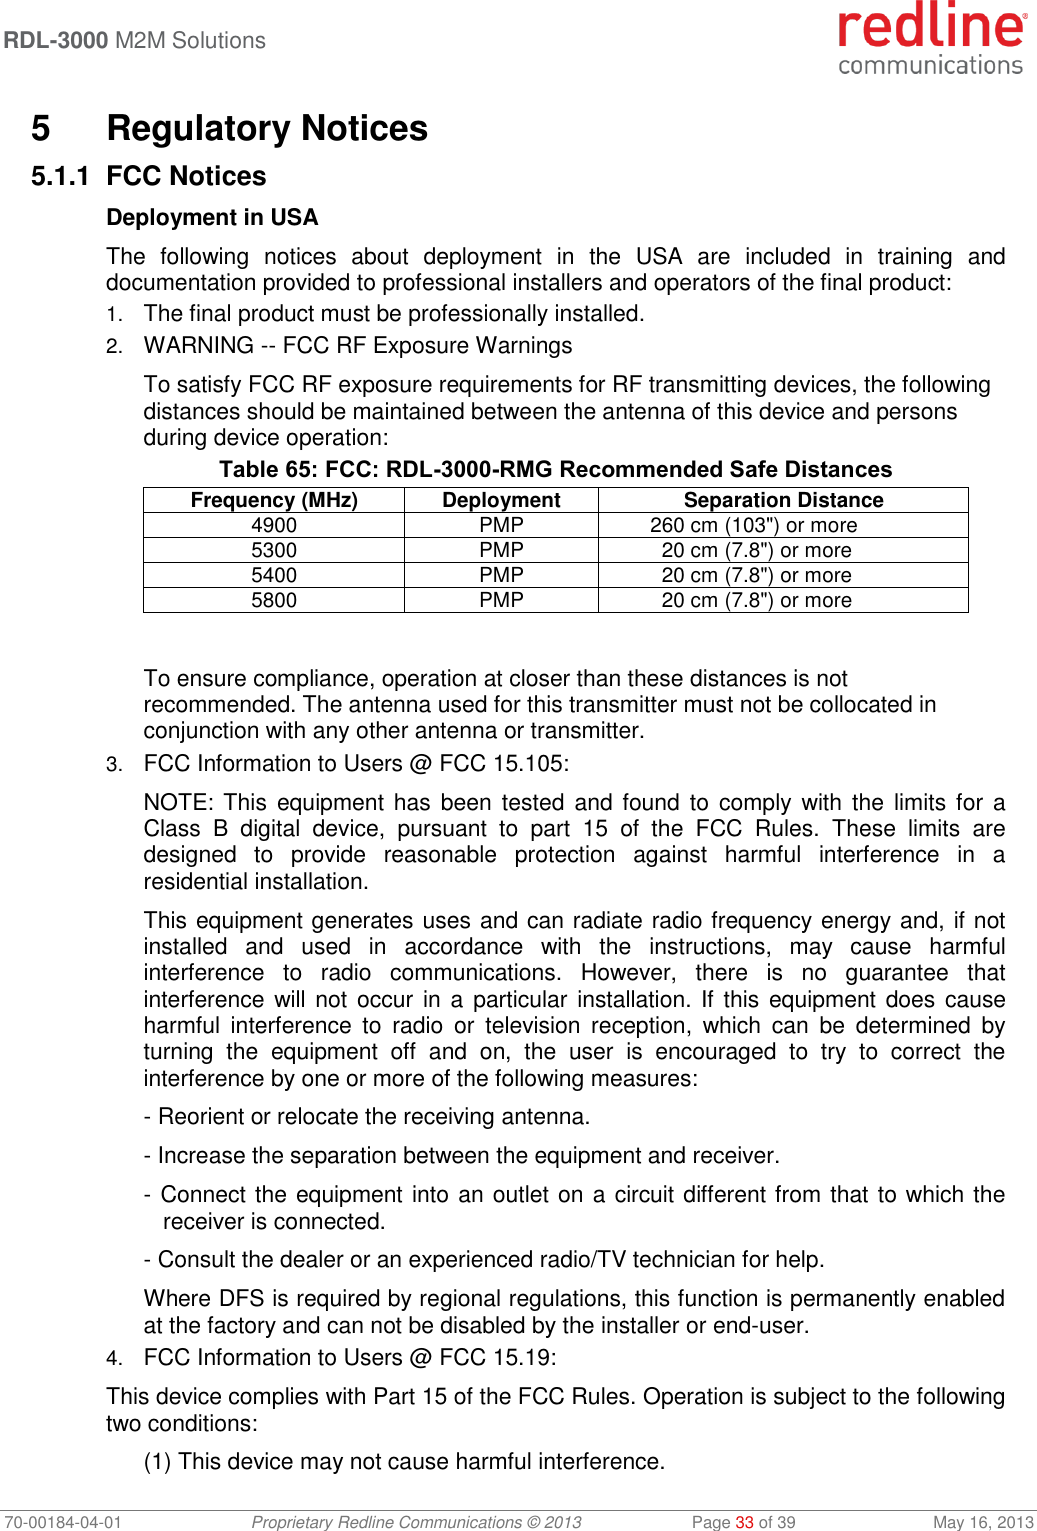  RDL-3000 M2M Solutions   70-00184-04-01 Proprietary Redline Communications © 2013  Page 33 of 39  May 16, 2013  5  Regulatory Notices 5.1.1 FCC Notices Deployment in USA The  following  notices  about  deployment  in  the  USA  are  included  in  training  and documentation provided to professional installers and operators of the final product: 1. The final product must be professionally installed. 2. WARNING -- FCC RF Exposure Warnings To satisfy FCC RF exposure requirements for RF transmitting devices, the following distances should be maintained between the antenna of this device and persons during device operation: Table 65: FCC: RDL-3000-RMG Recommended Safe Distances Frequency (MHz) Deployment Separation Distance 4900 PMP 260 cm (103&quot;) or more 5300 PMP 20 cm (7.8&quot;) or more 5400 PMP 20 cm (7.8&quot;) or more 5800 PMP 20 cm (7.8&quot;) or more  To ensure compliance, operation at closer than these distances is not recommended. The antenna used for this transmitter must not be collocated in conjunction with any other antenna or transmitter. 3. FCC Information to Users @ FCC 15.105: NOTE: This  equipment has  been  tested  and  found to  comply with the  limits for a Class  B  digital  device,  pursuant  to  part  15  of  the  FCC  Rules.  These  limits  are designed  to  provide  reasonable  protection  against  harmful  interference  in  a residential installation. This equipment generates uses and can radiate radio frequency energy and, if not installed  and  used  in  accordance  with  the  instructions,  may  cause  harmful interference  to  radio  communications.  However,  there  is  no  guarantee  that interference will not  occur  in a  particular installation. If this  equipment does cause harmful  interference  to  radio  or  television  reception,  which  can  be  determined  by turning  the  equipment  off  and  on,  the  user  is  encouraged  to  try  to  correct  the interference by one or more of the following measures: - Reorient or relocate the receiving antenna. - Increase the separation between the equipment and receiver. - Connect the equipment into an outlet on a circuit different from that to which the receiver is connected. - Consult the dealer or an experienced radio/TV technician for help. Where DFS is required by regional regulations, this function is permanently enabled at the factory and can not be disabled by the installer or end-user. 4. FCC Information to Users @ FCC 15.19: This device complies with Part 15 of the FCC Rules. Operation is subject to the following two conditions: (1) This device may not cause harmful interference. 